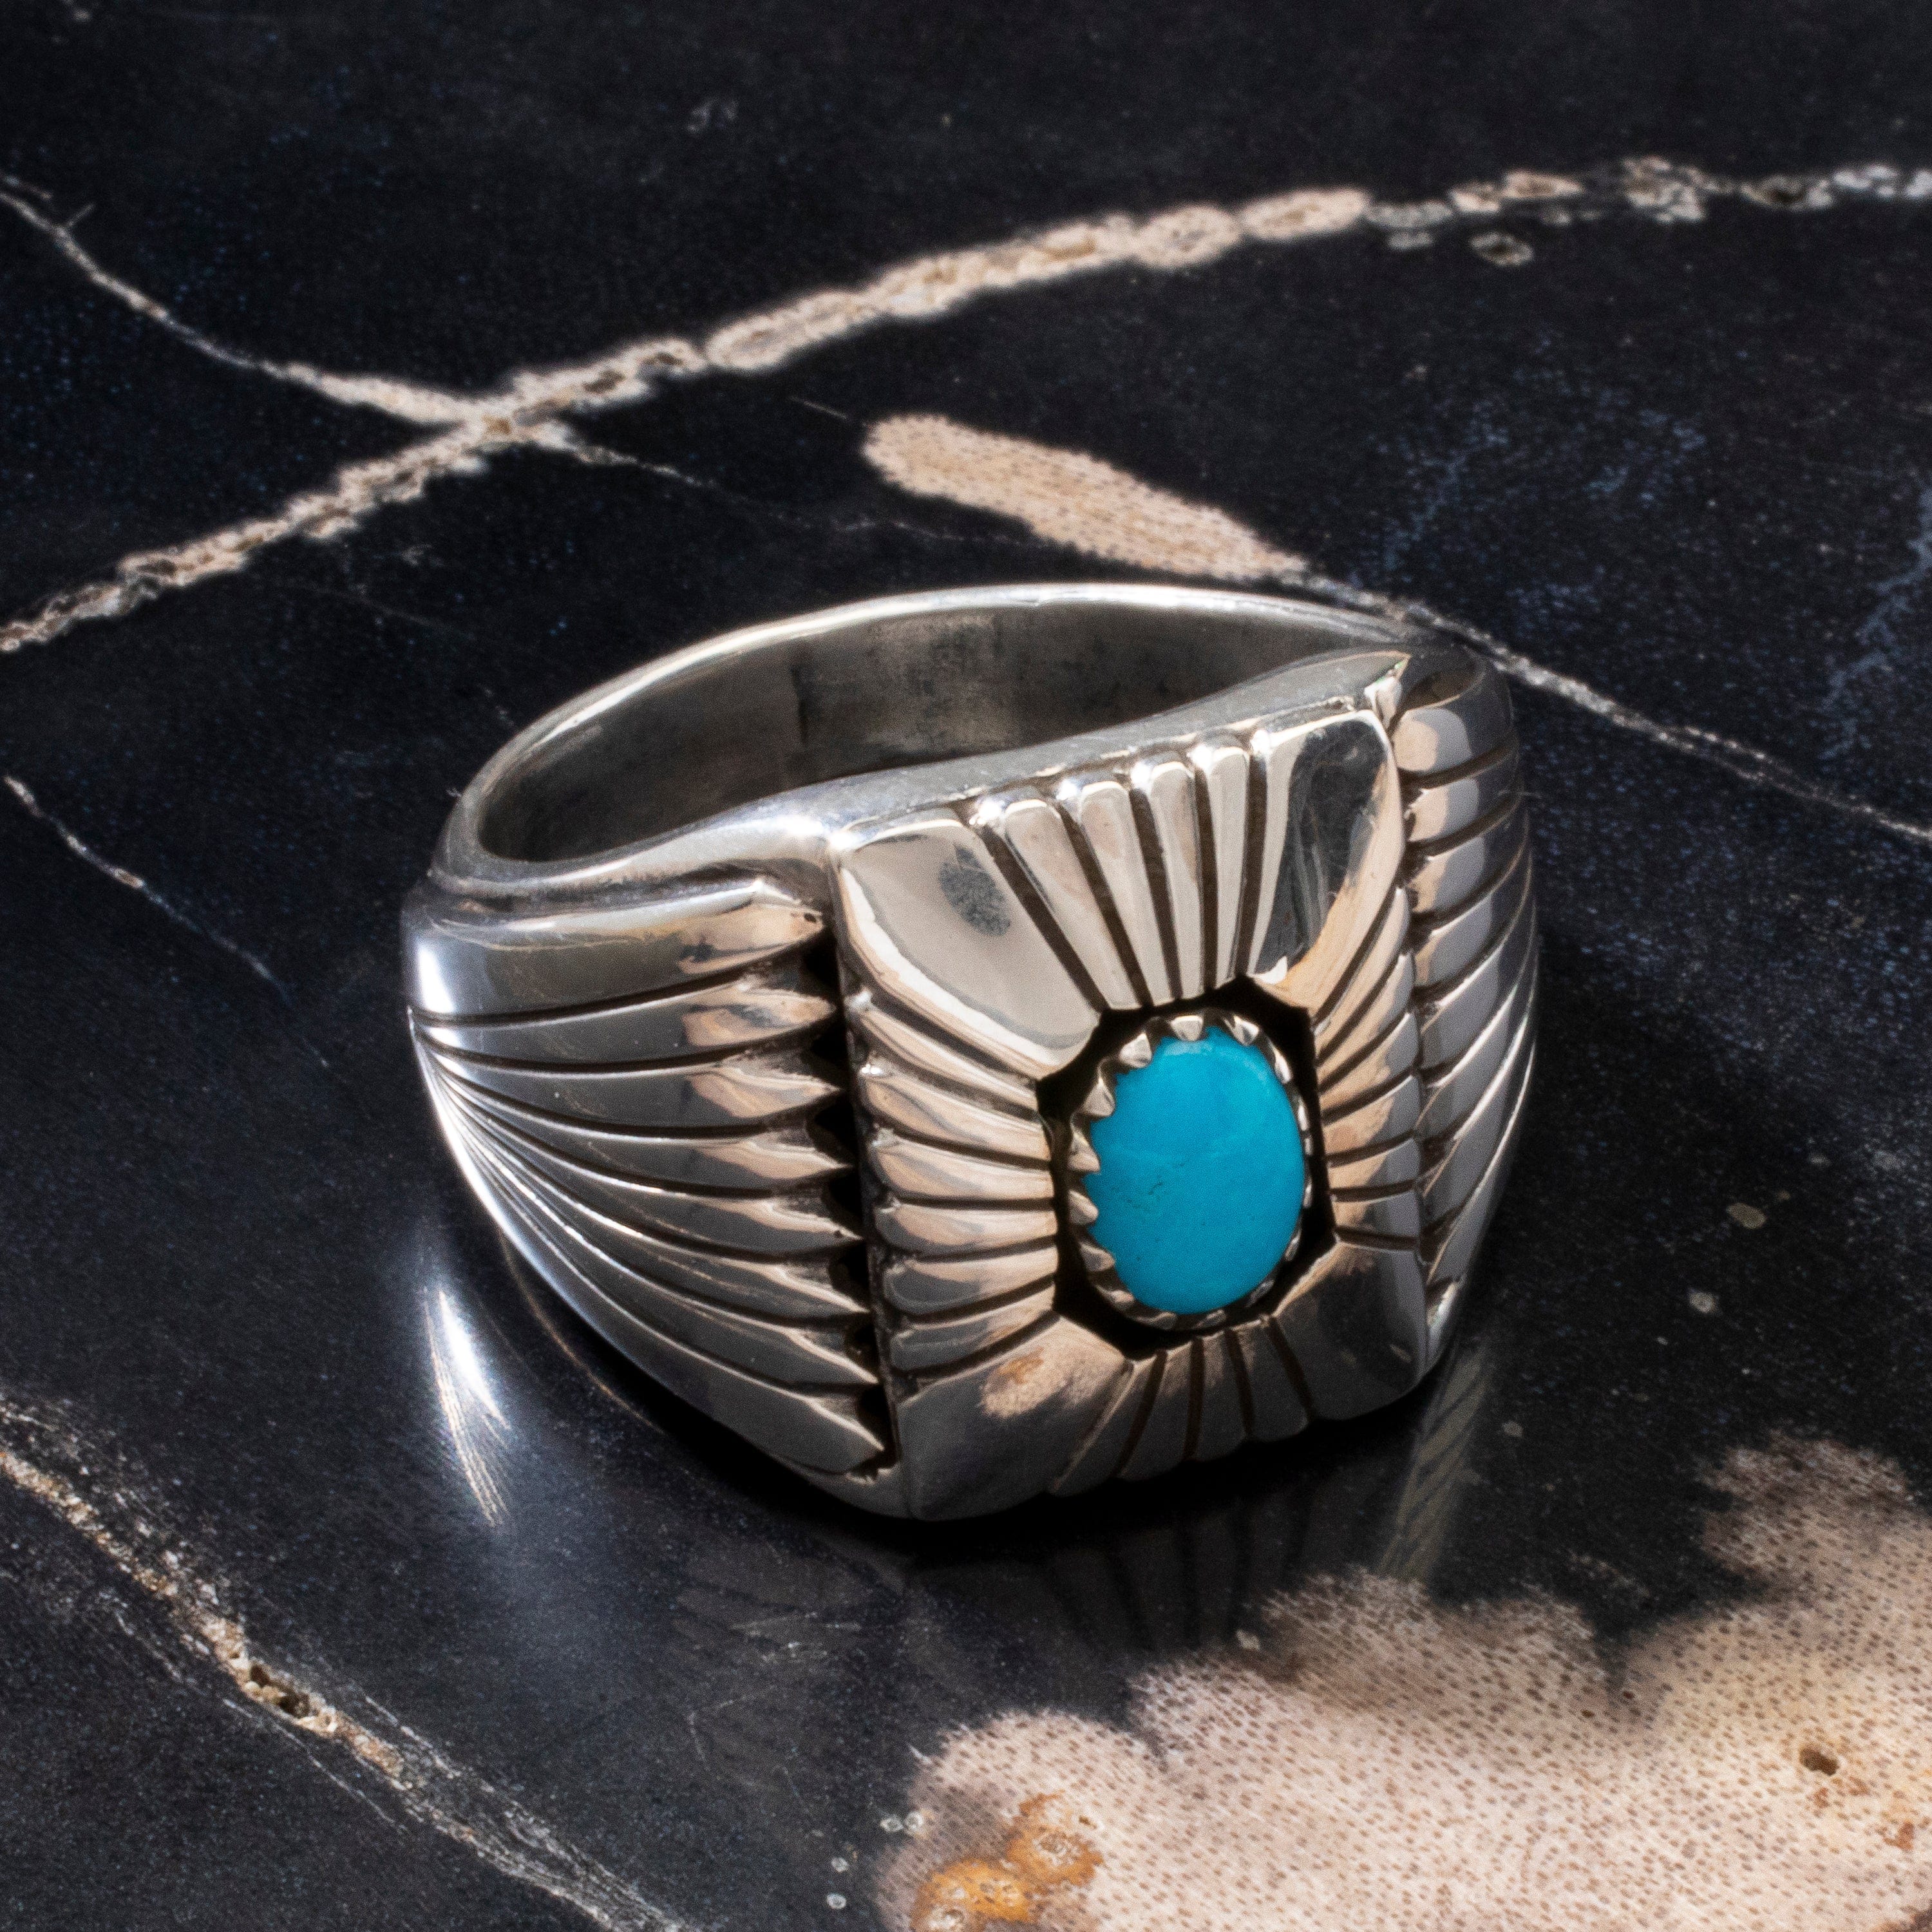 Kalifano Native American Jewelry Sleeping Beauty Turquoise Navajo USA Native American Made 925 Sterling Silver Ring